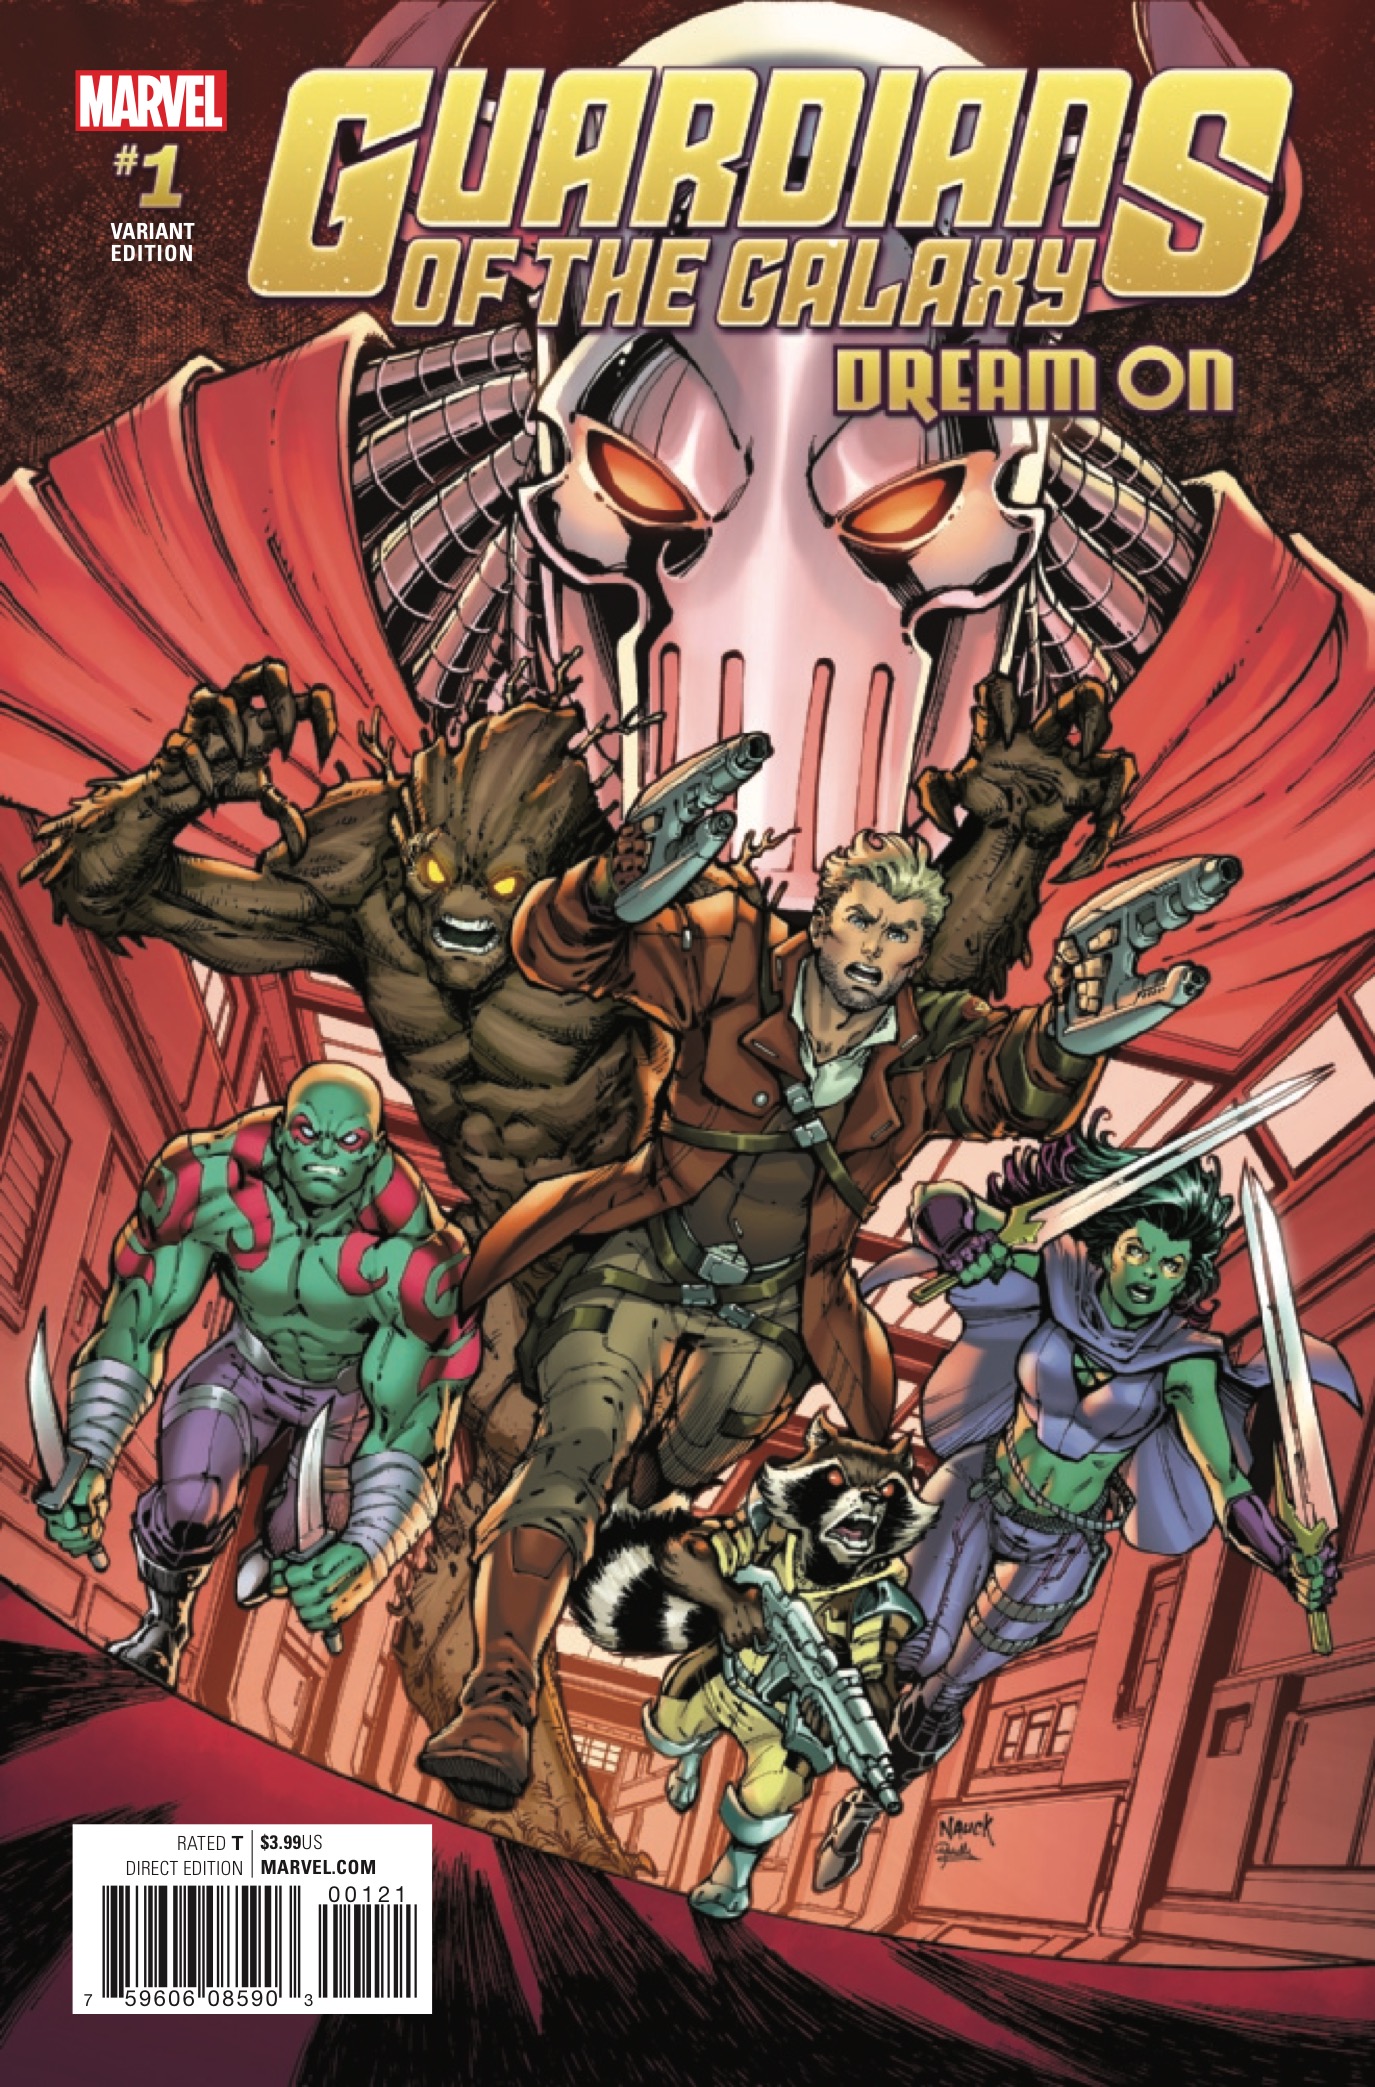 Marvel Preview: Guardians of the Galaxy Dream On #1